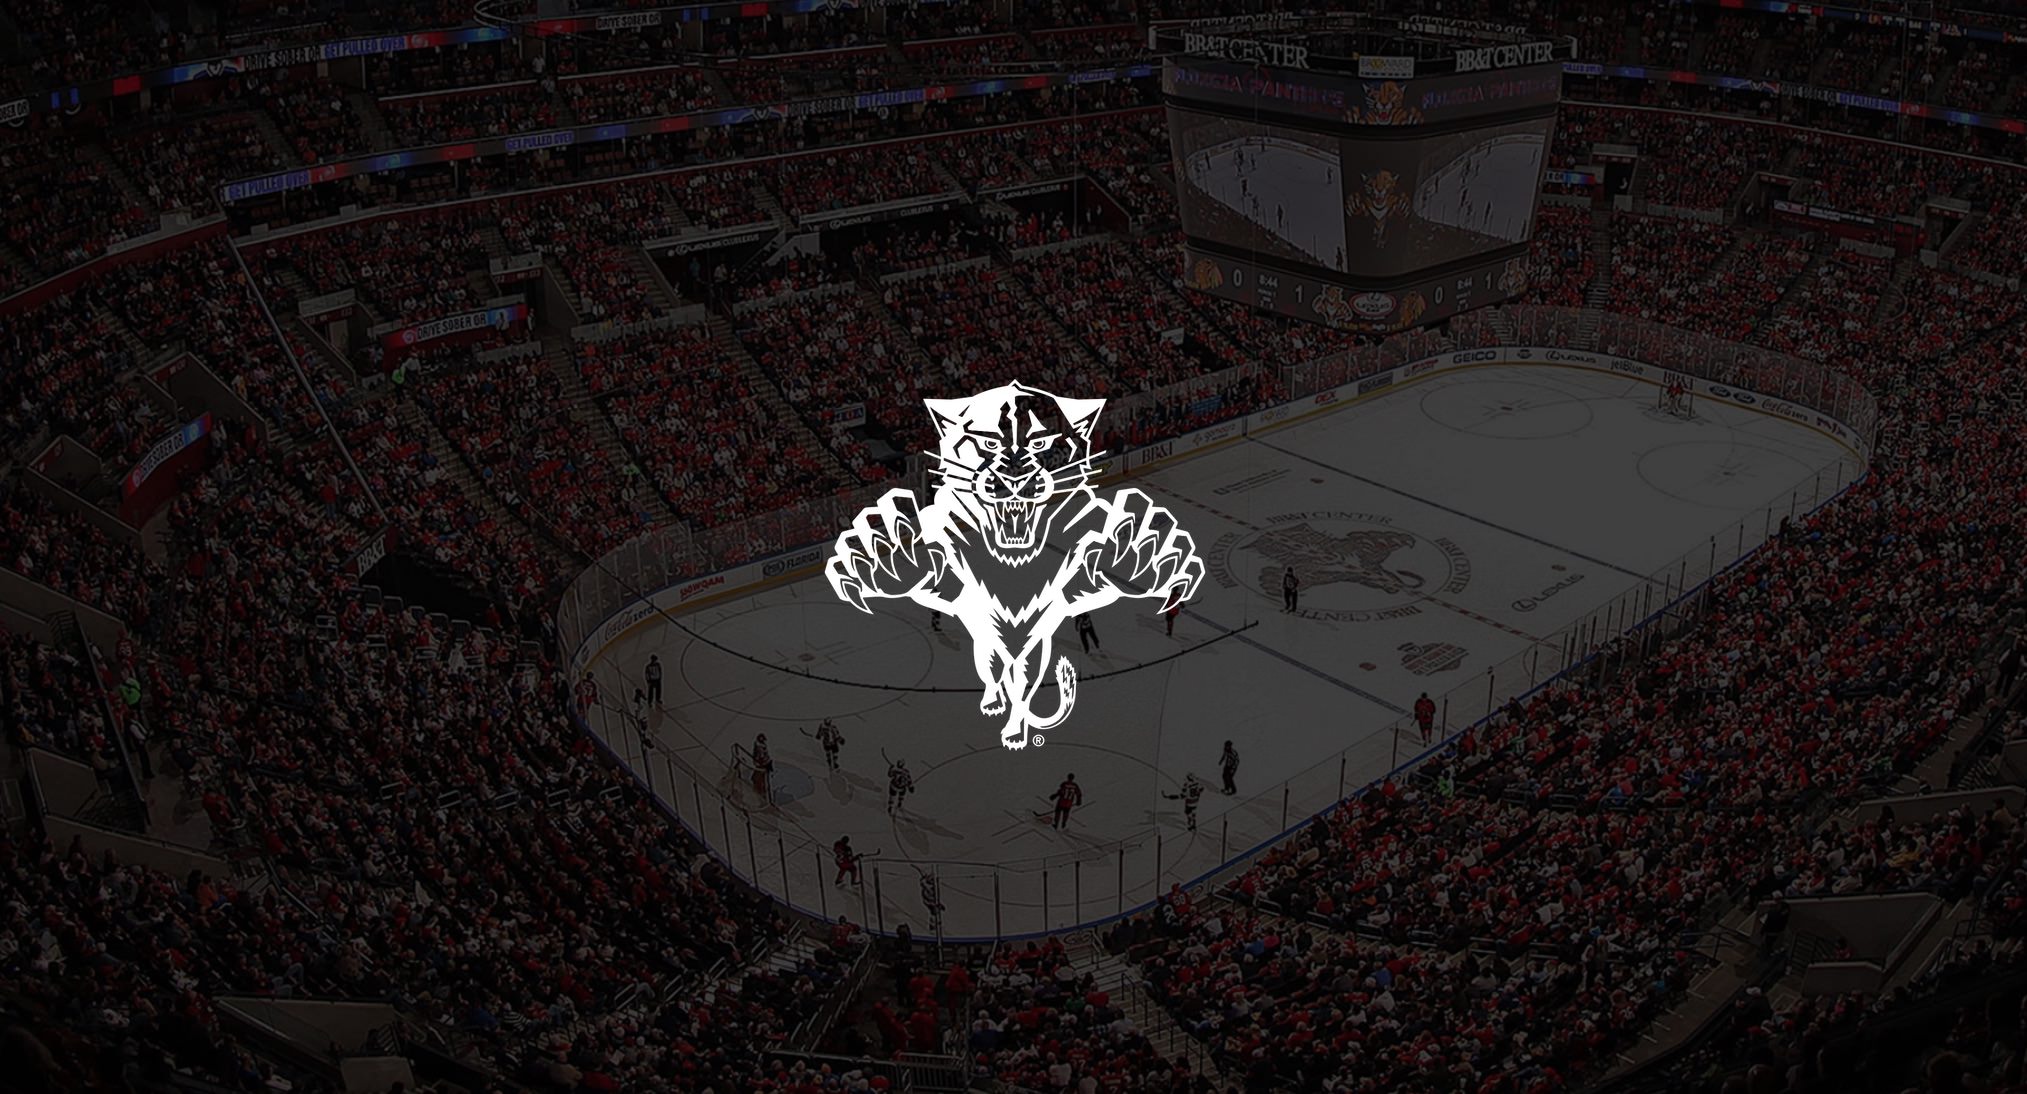 White Florida Panthers Hockey logo with dimmed background of aerial view of hockey rink with crowd